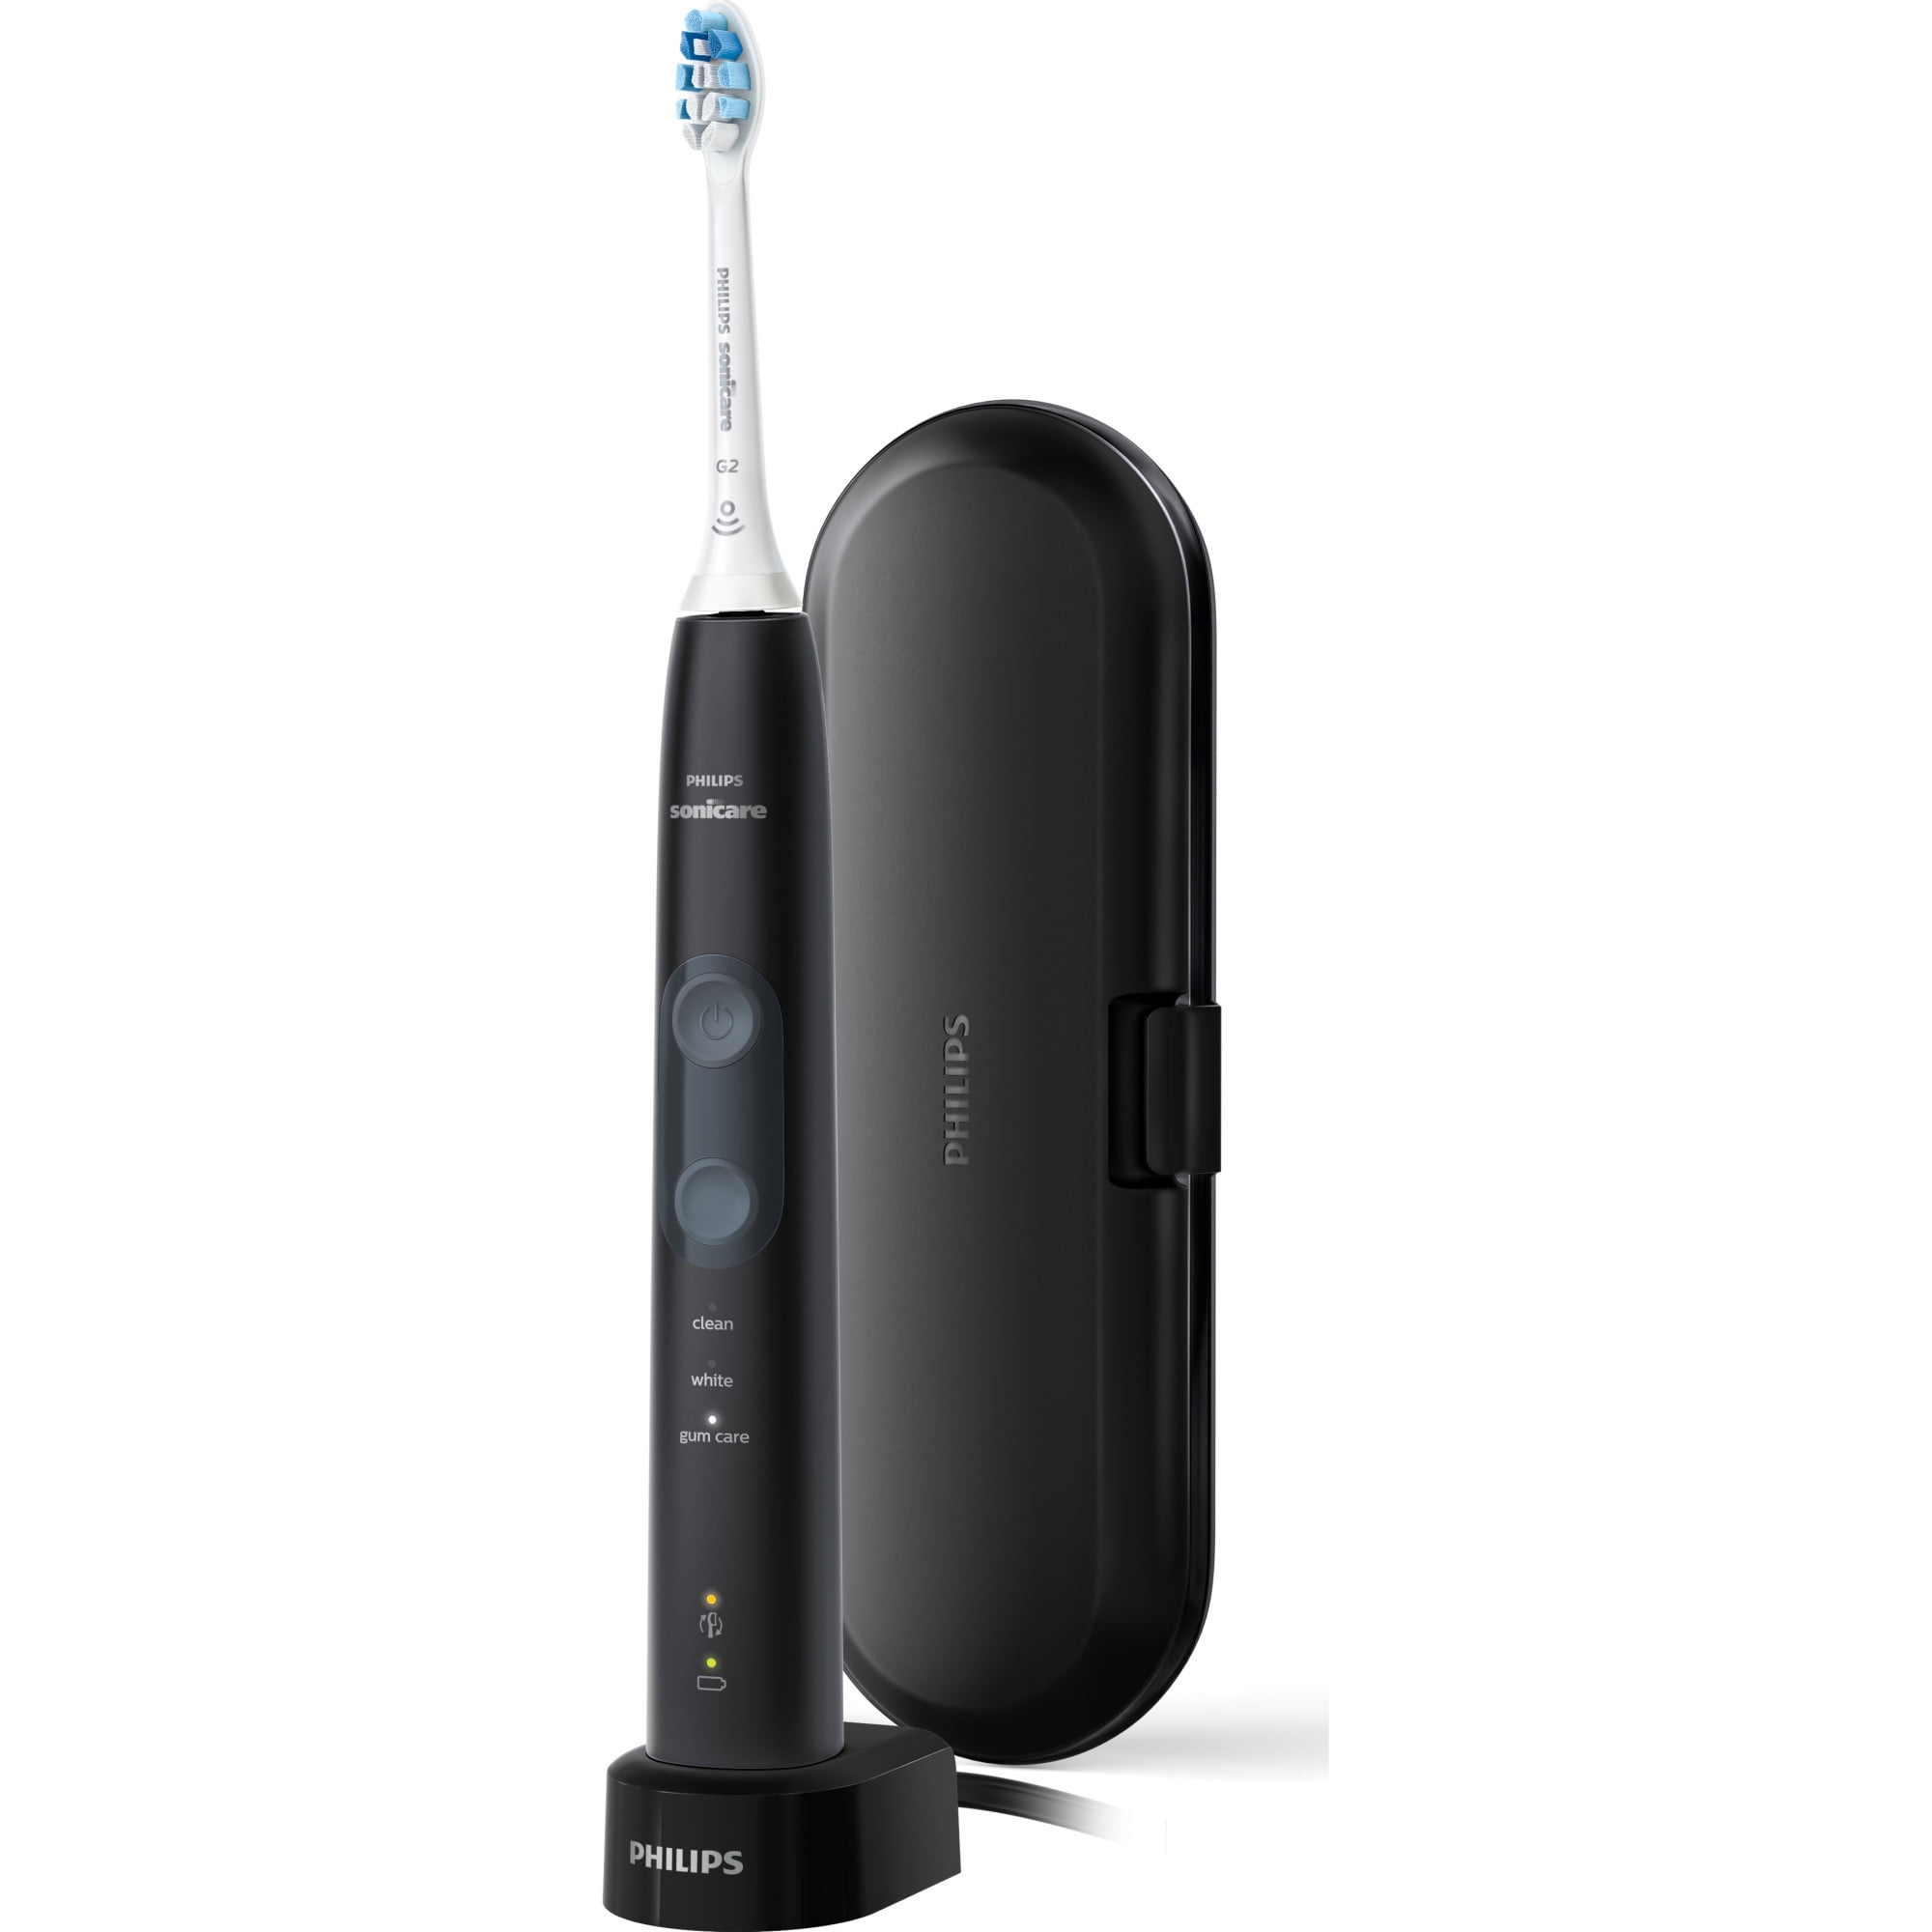 over-150-in-rebates-coupons-for-the-sonicare-electric-toothbrush